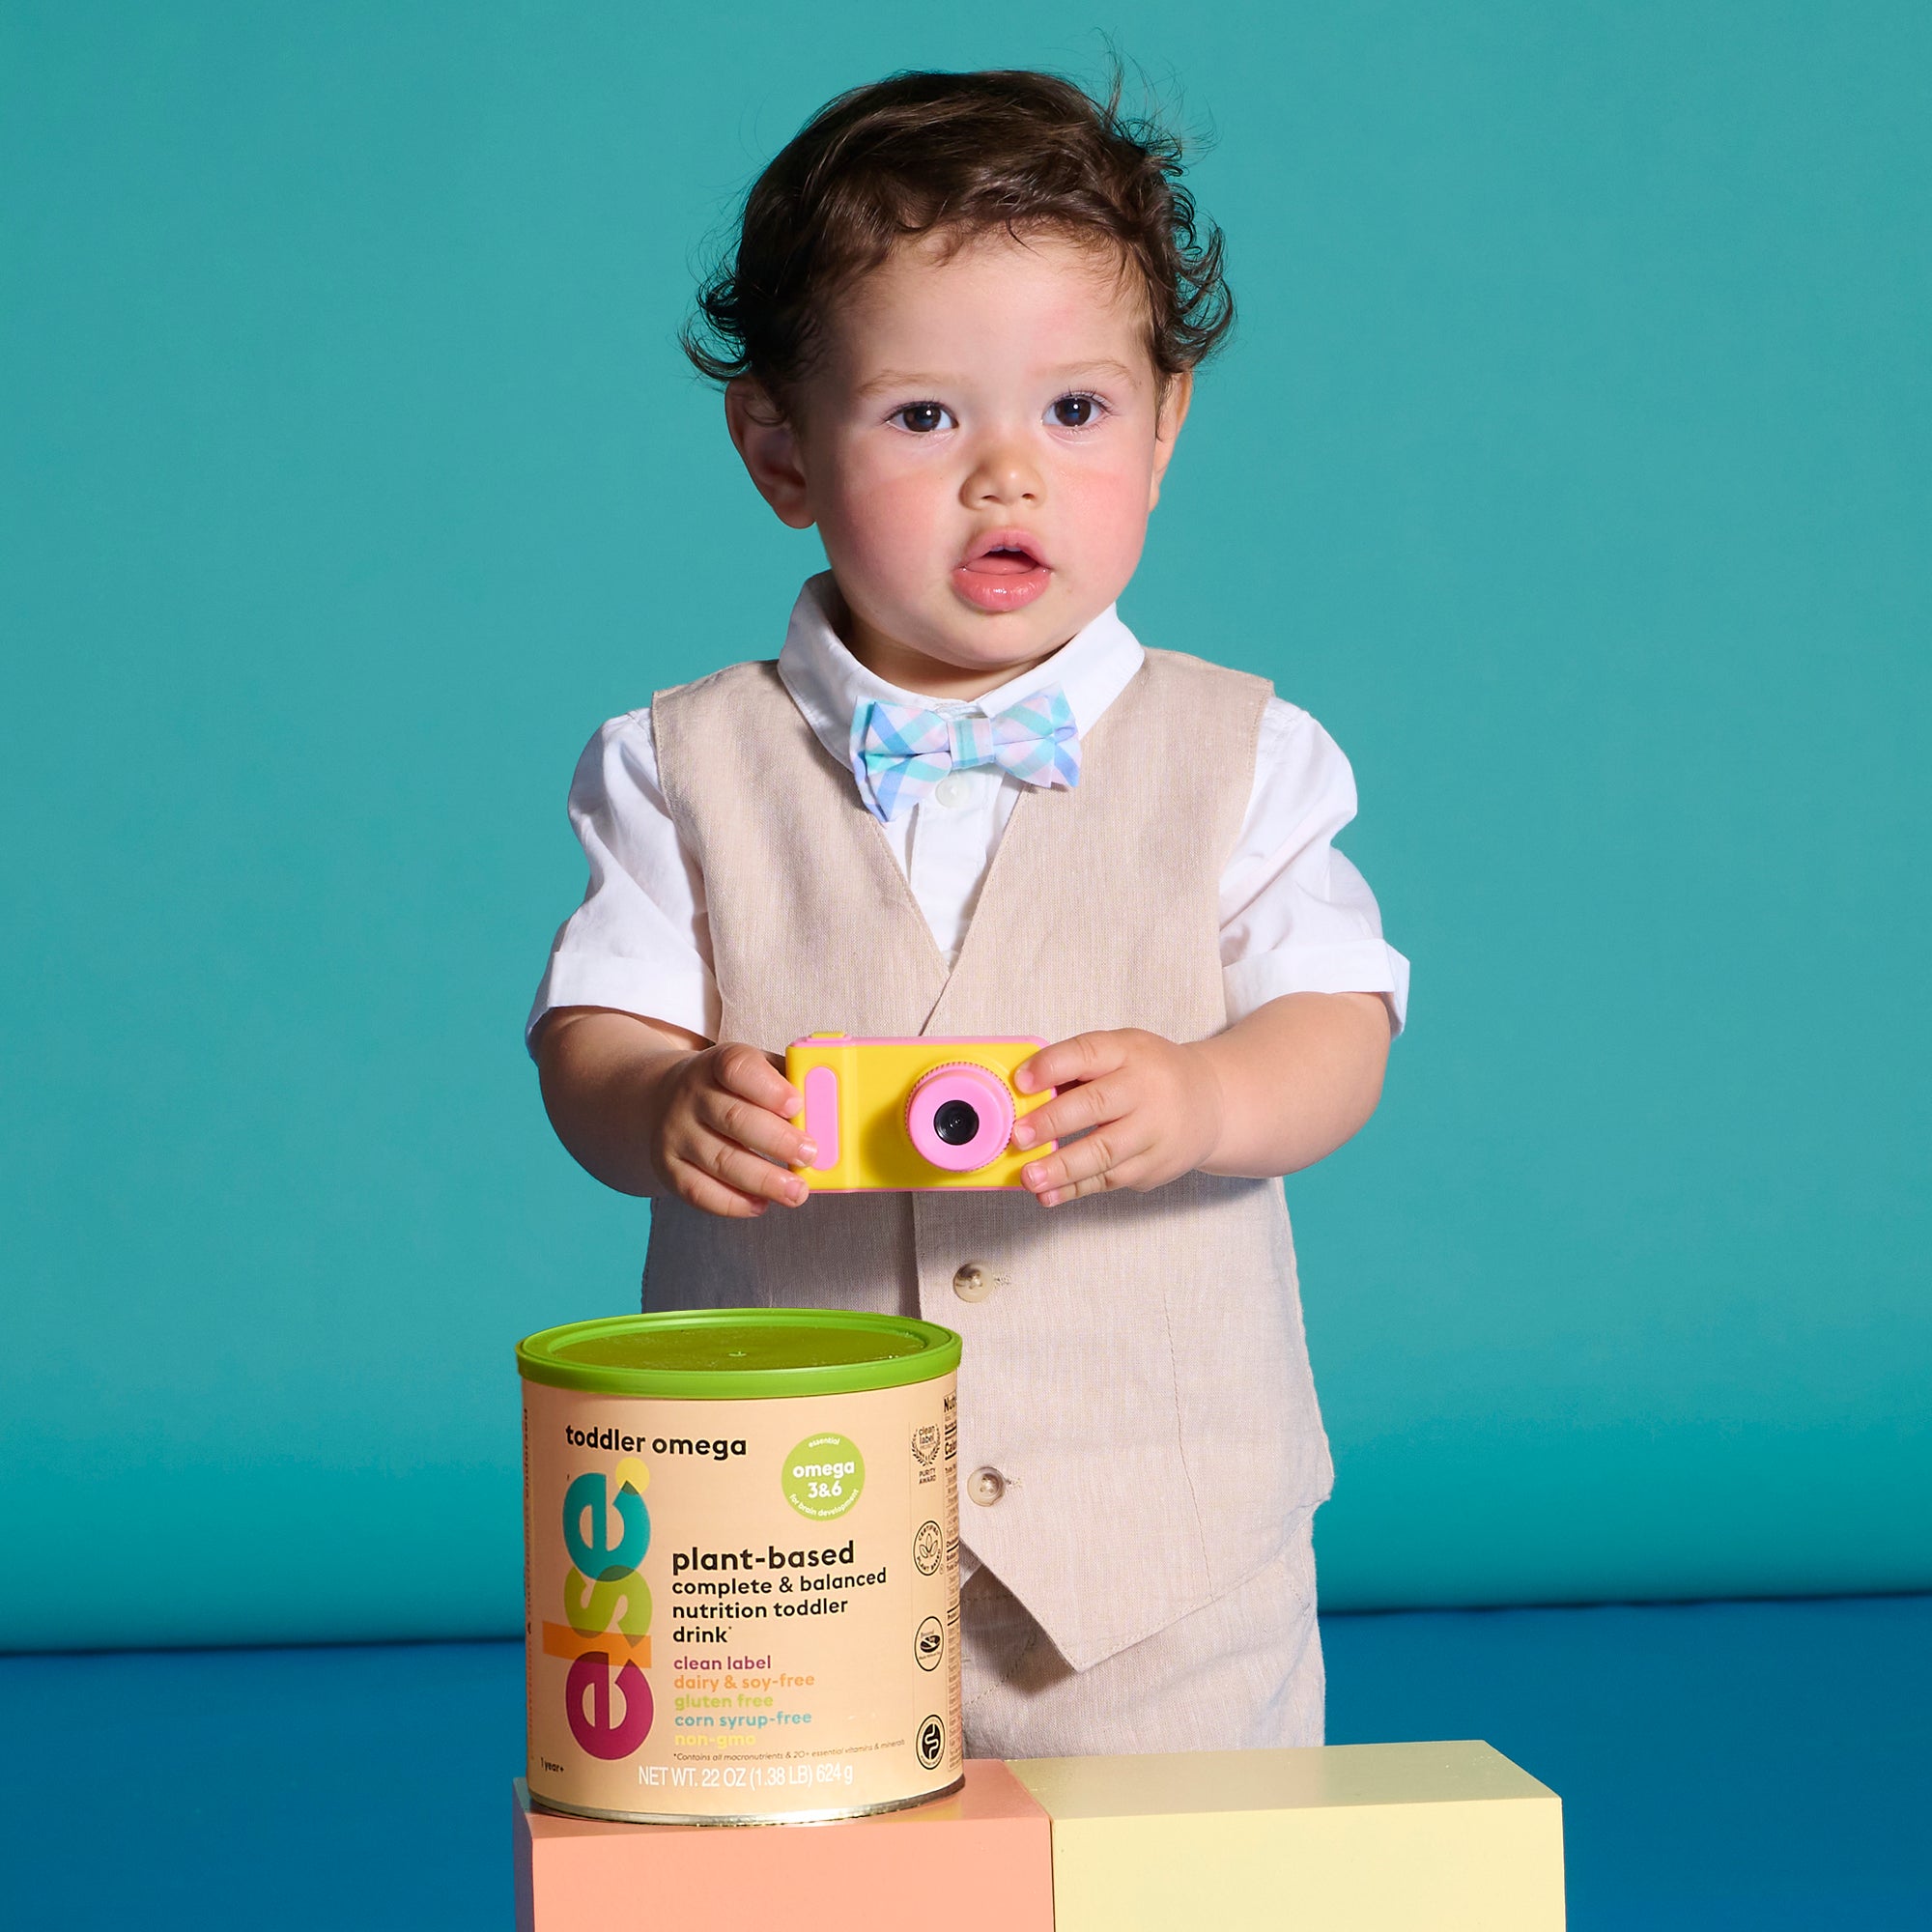 else dairy-free toddler formula can and toddler